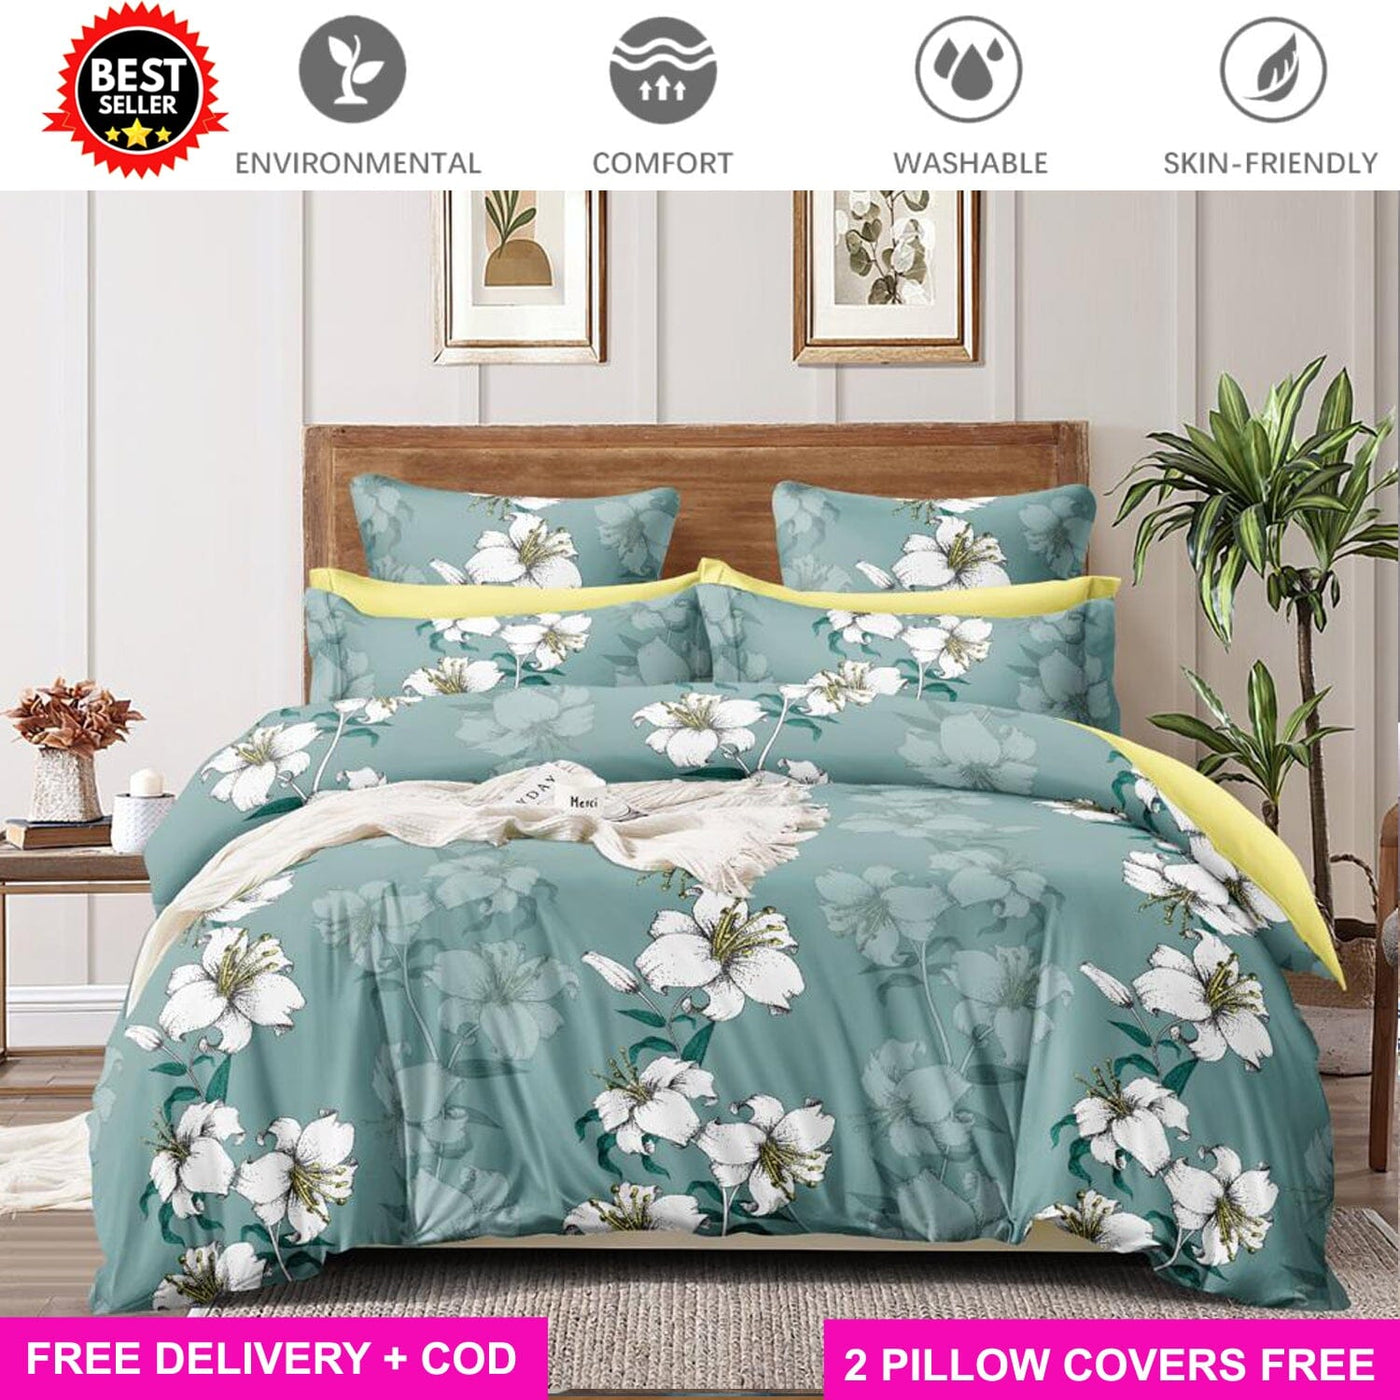 Lime Green Floral Full Elastic Fitted Bedsheet with 2 Pillow Covers - King Size Bed Sheets Great Happy IN 